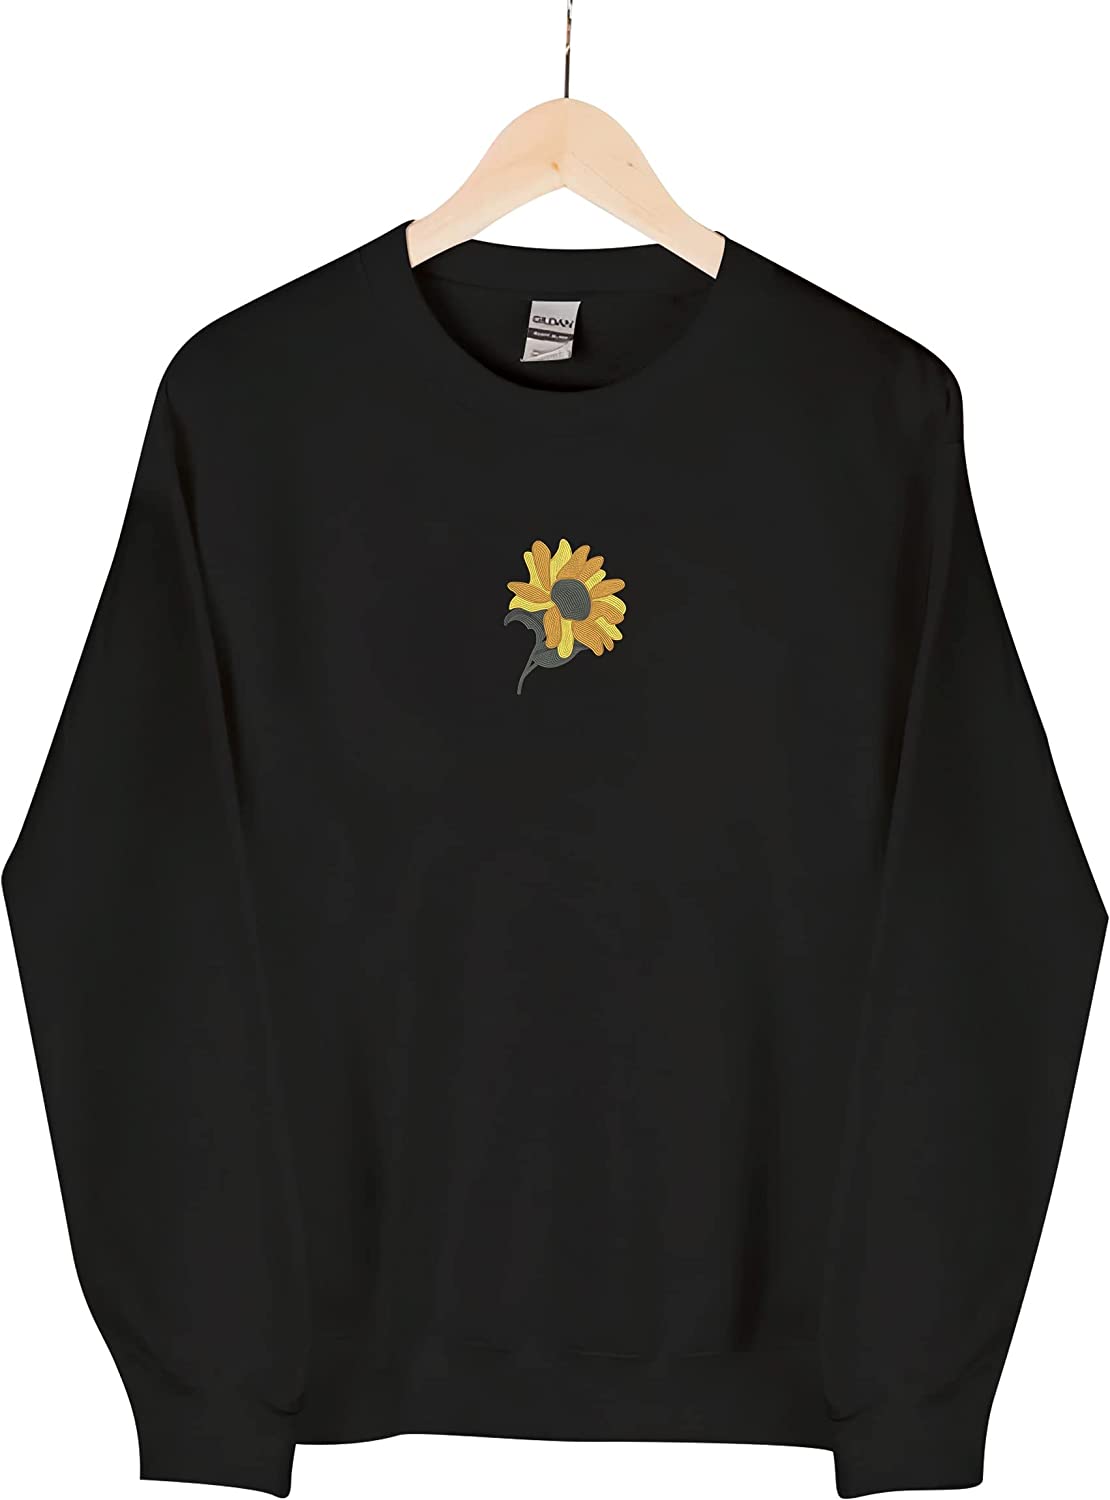 Embroly Women's Embroidered Sunflower Sweatshirt